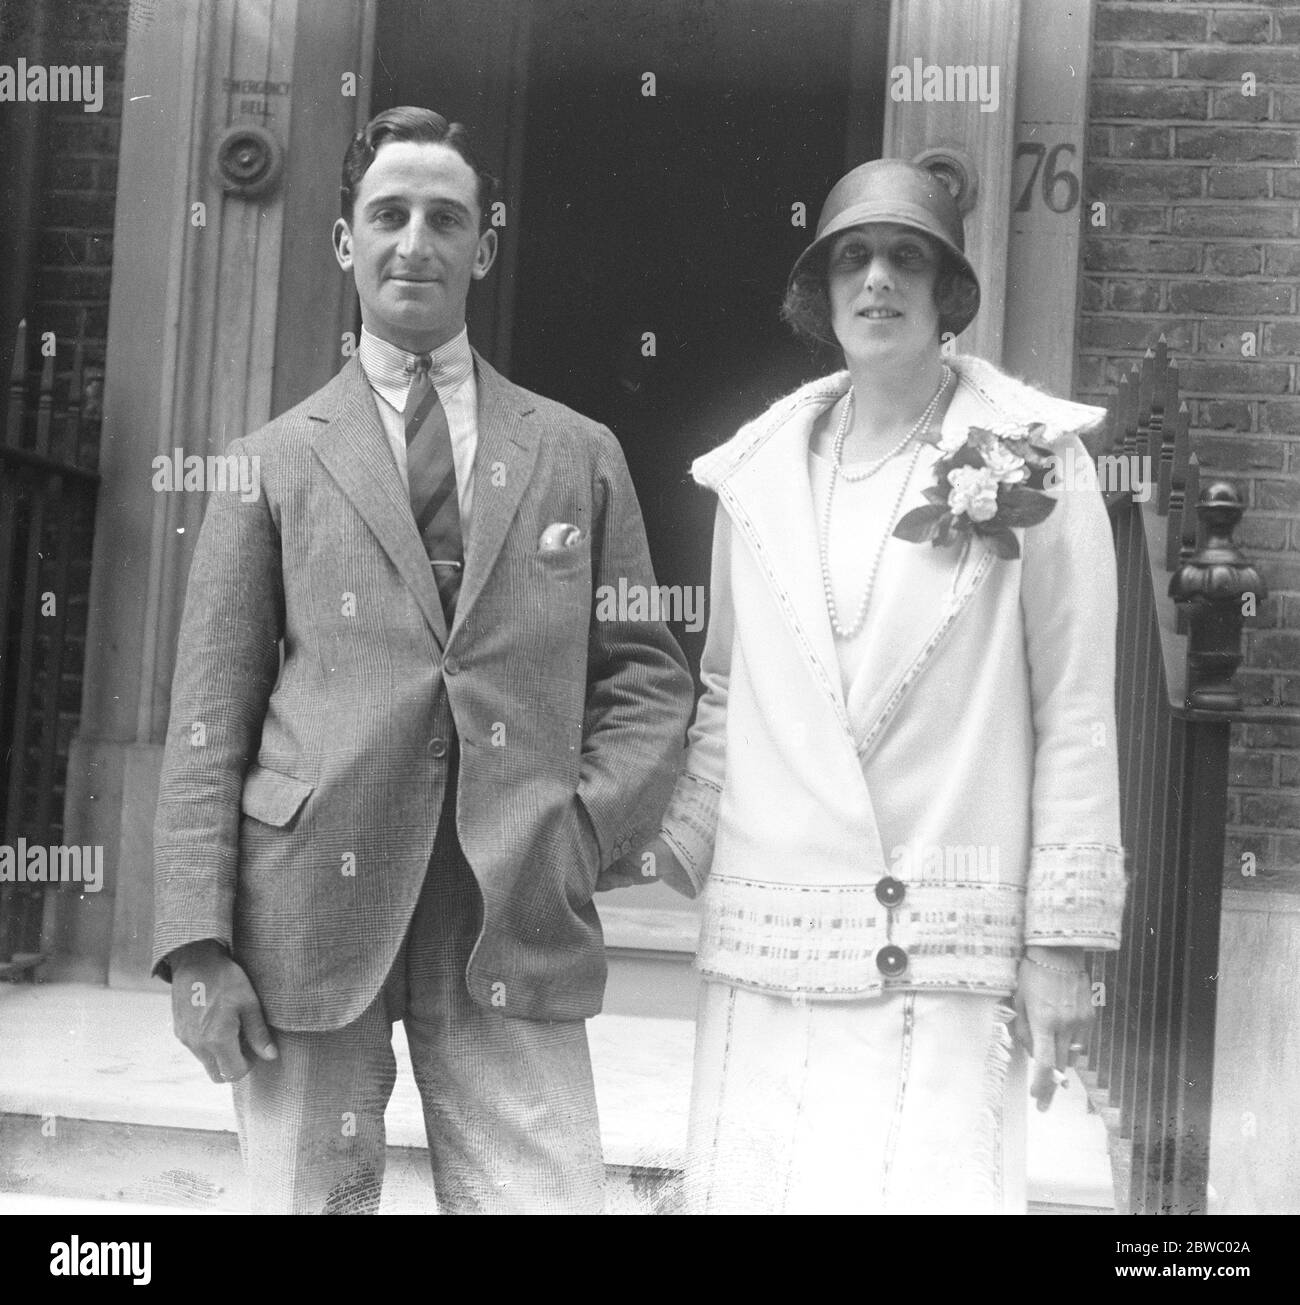 Countess of St Germans weds . Countess of St Germans , the Duke of Beaufort 's pretty widowed daughter to Captain Douglas on Tuesday . Bride and bridegroom photographed after the ceremony . 14 July 1924 Stock Photo